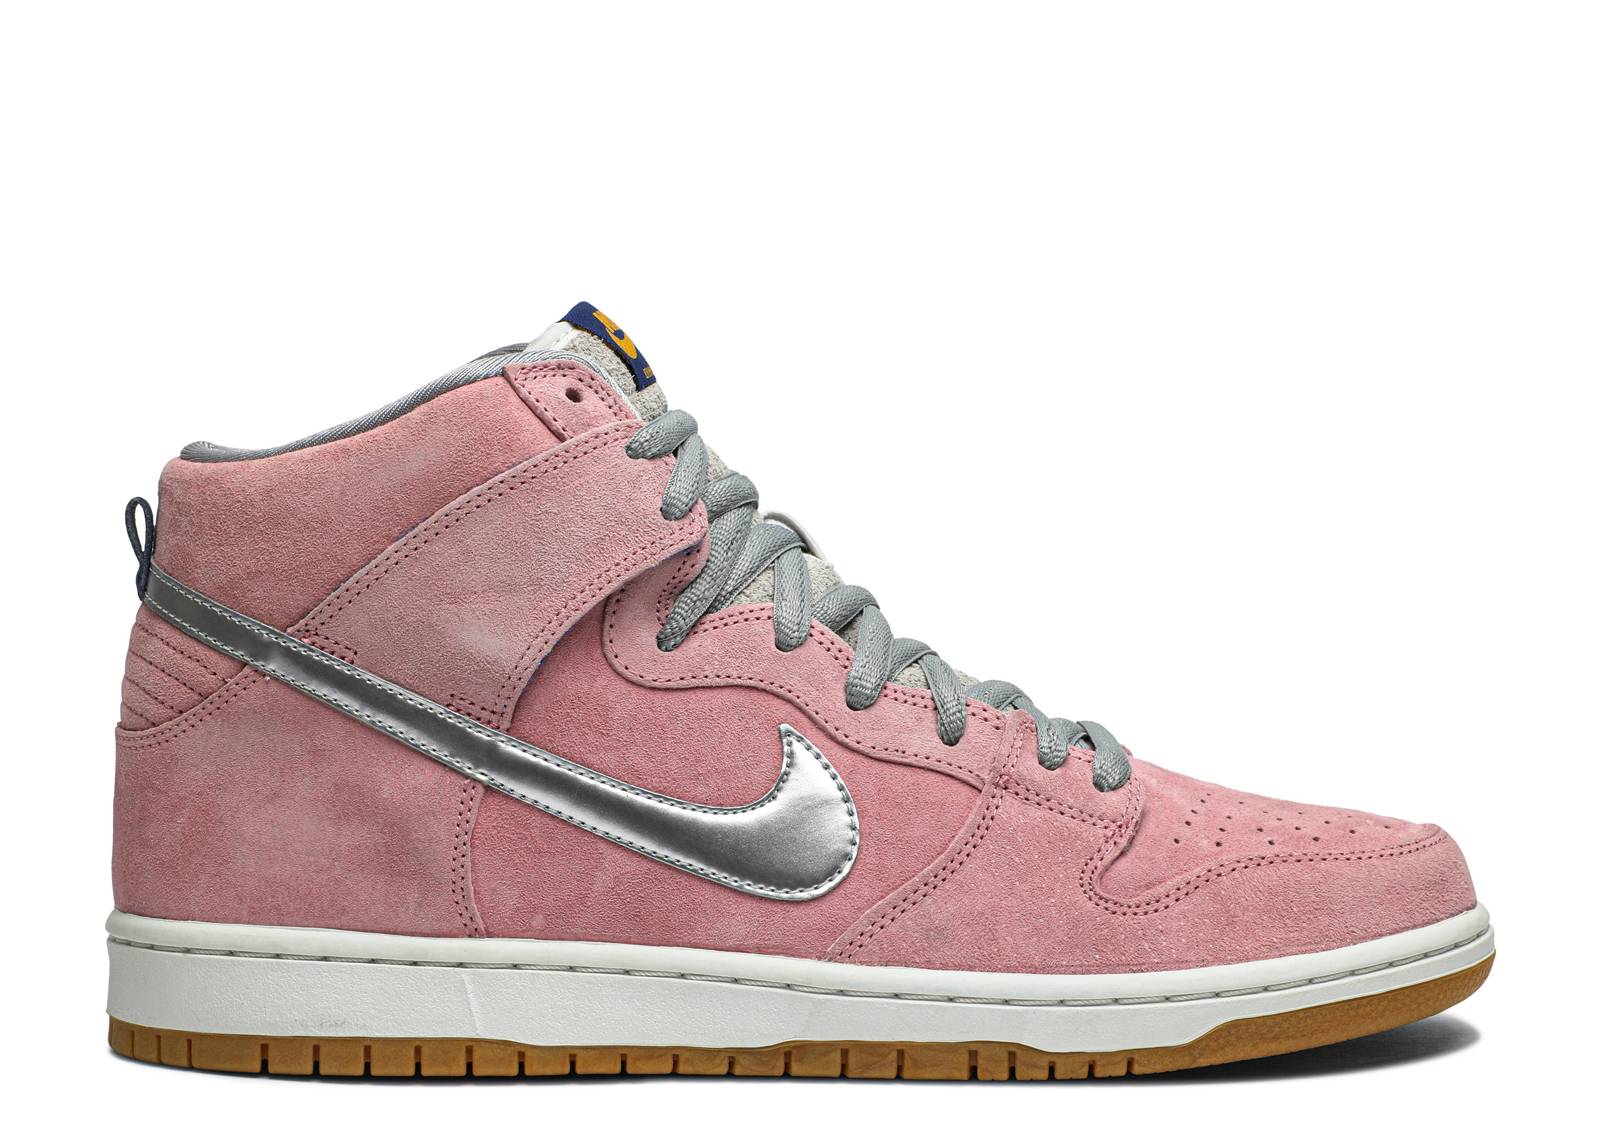 Concepts x Dunk High Pro Premium SB 'When Pigs Fly' Special Box